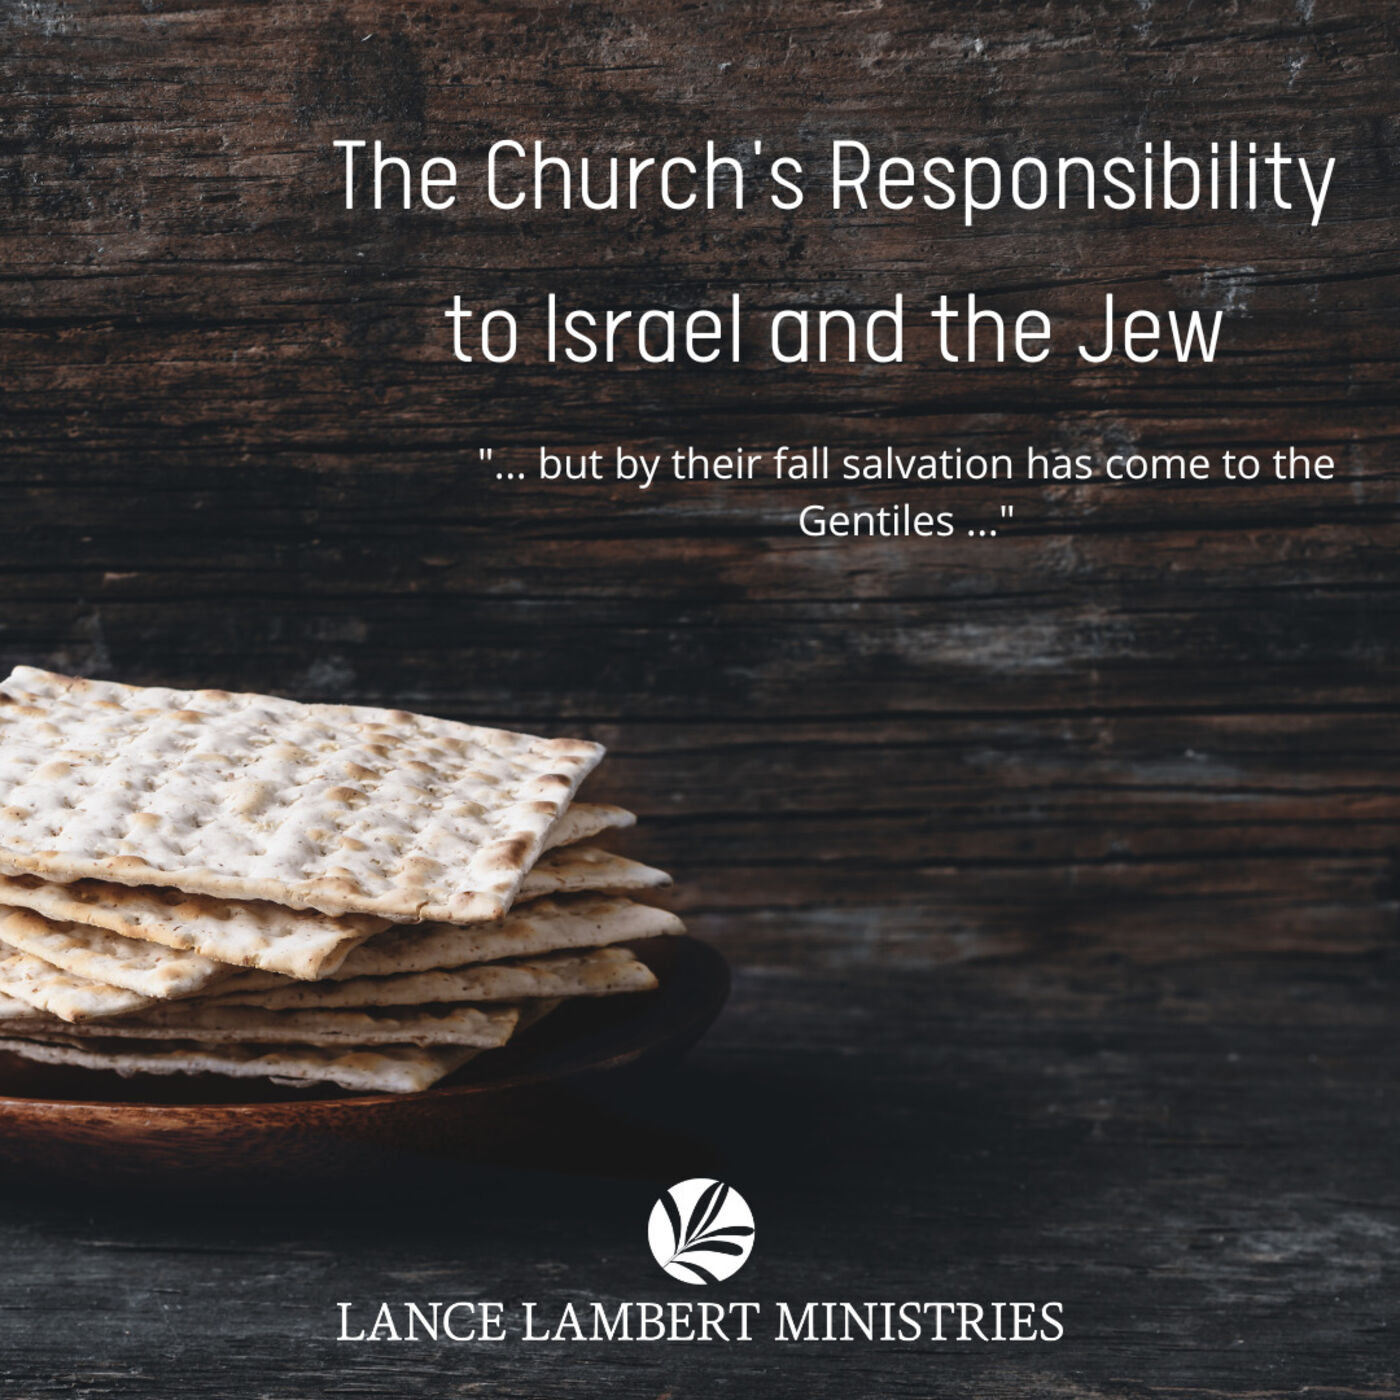 The Church's Responsibility to Israel and the Jew